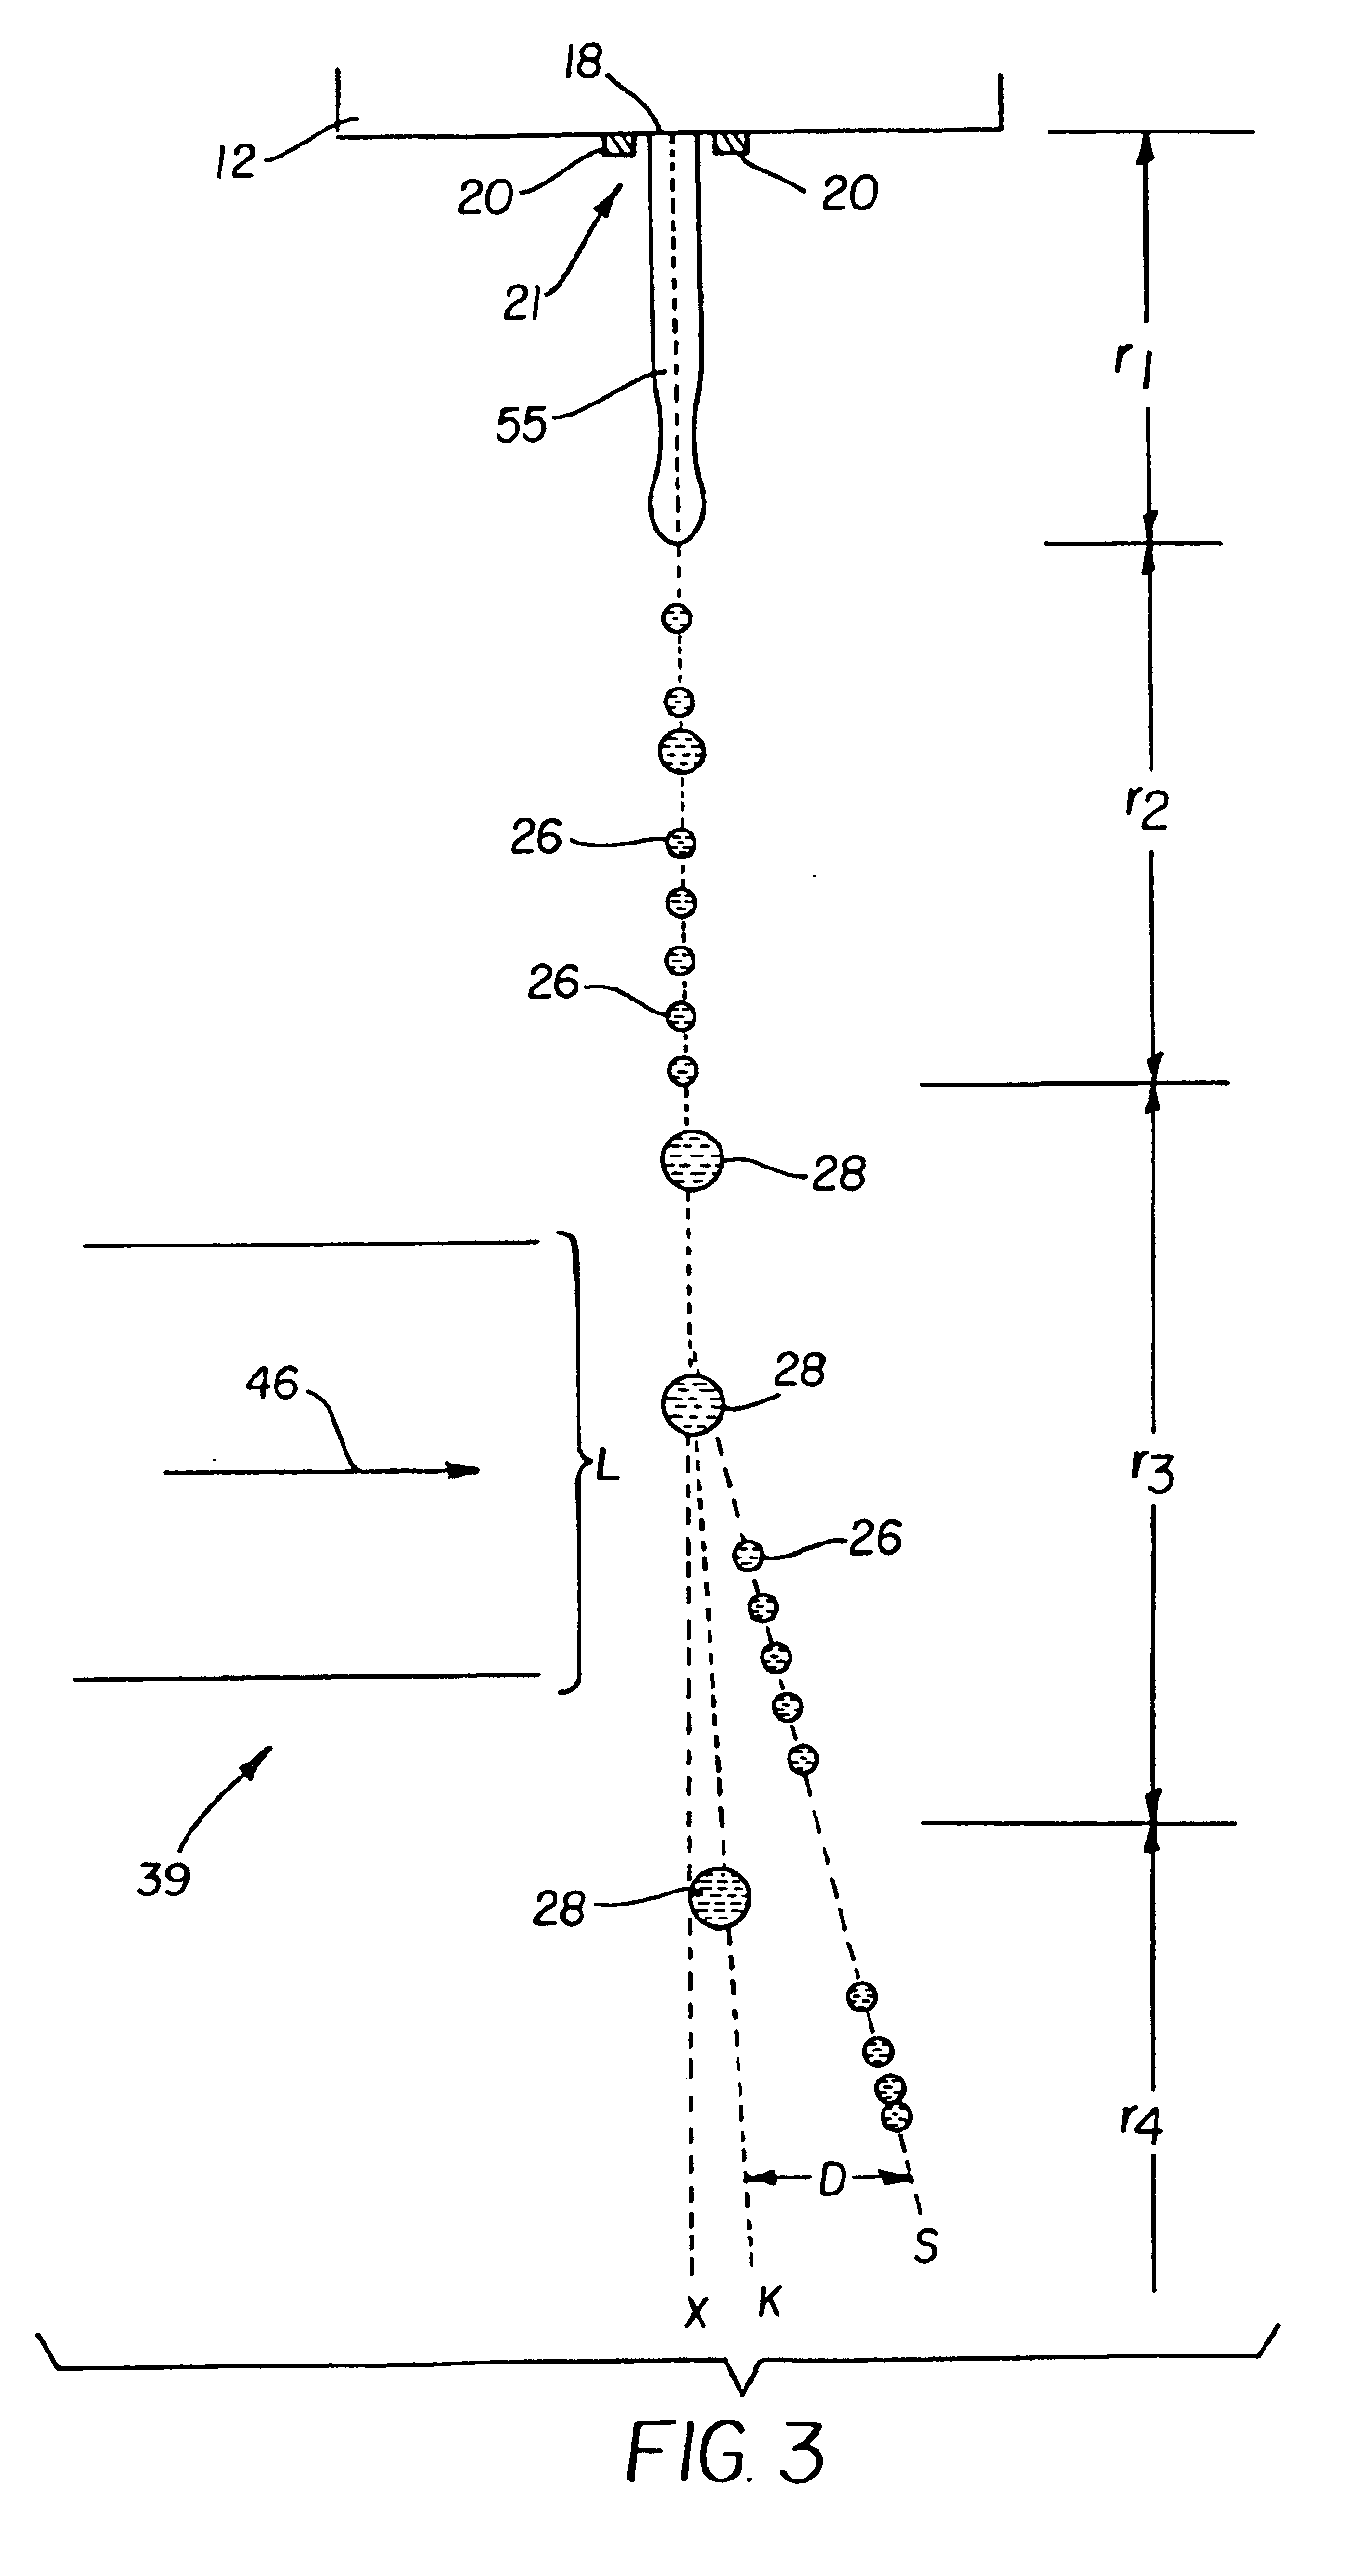 Continuous ink-jet printing apparatus having an improved droplet deflector and catcher